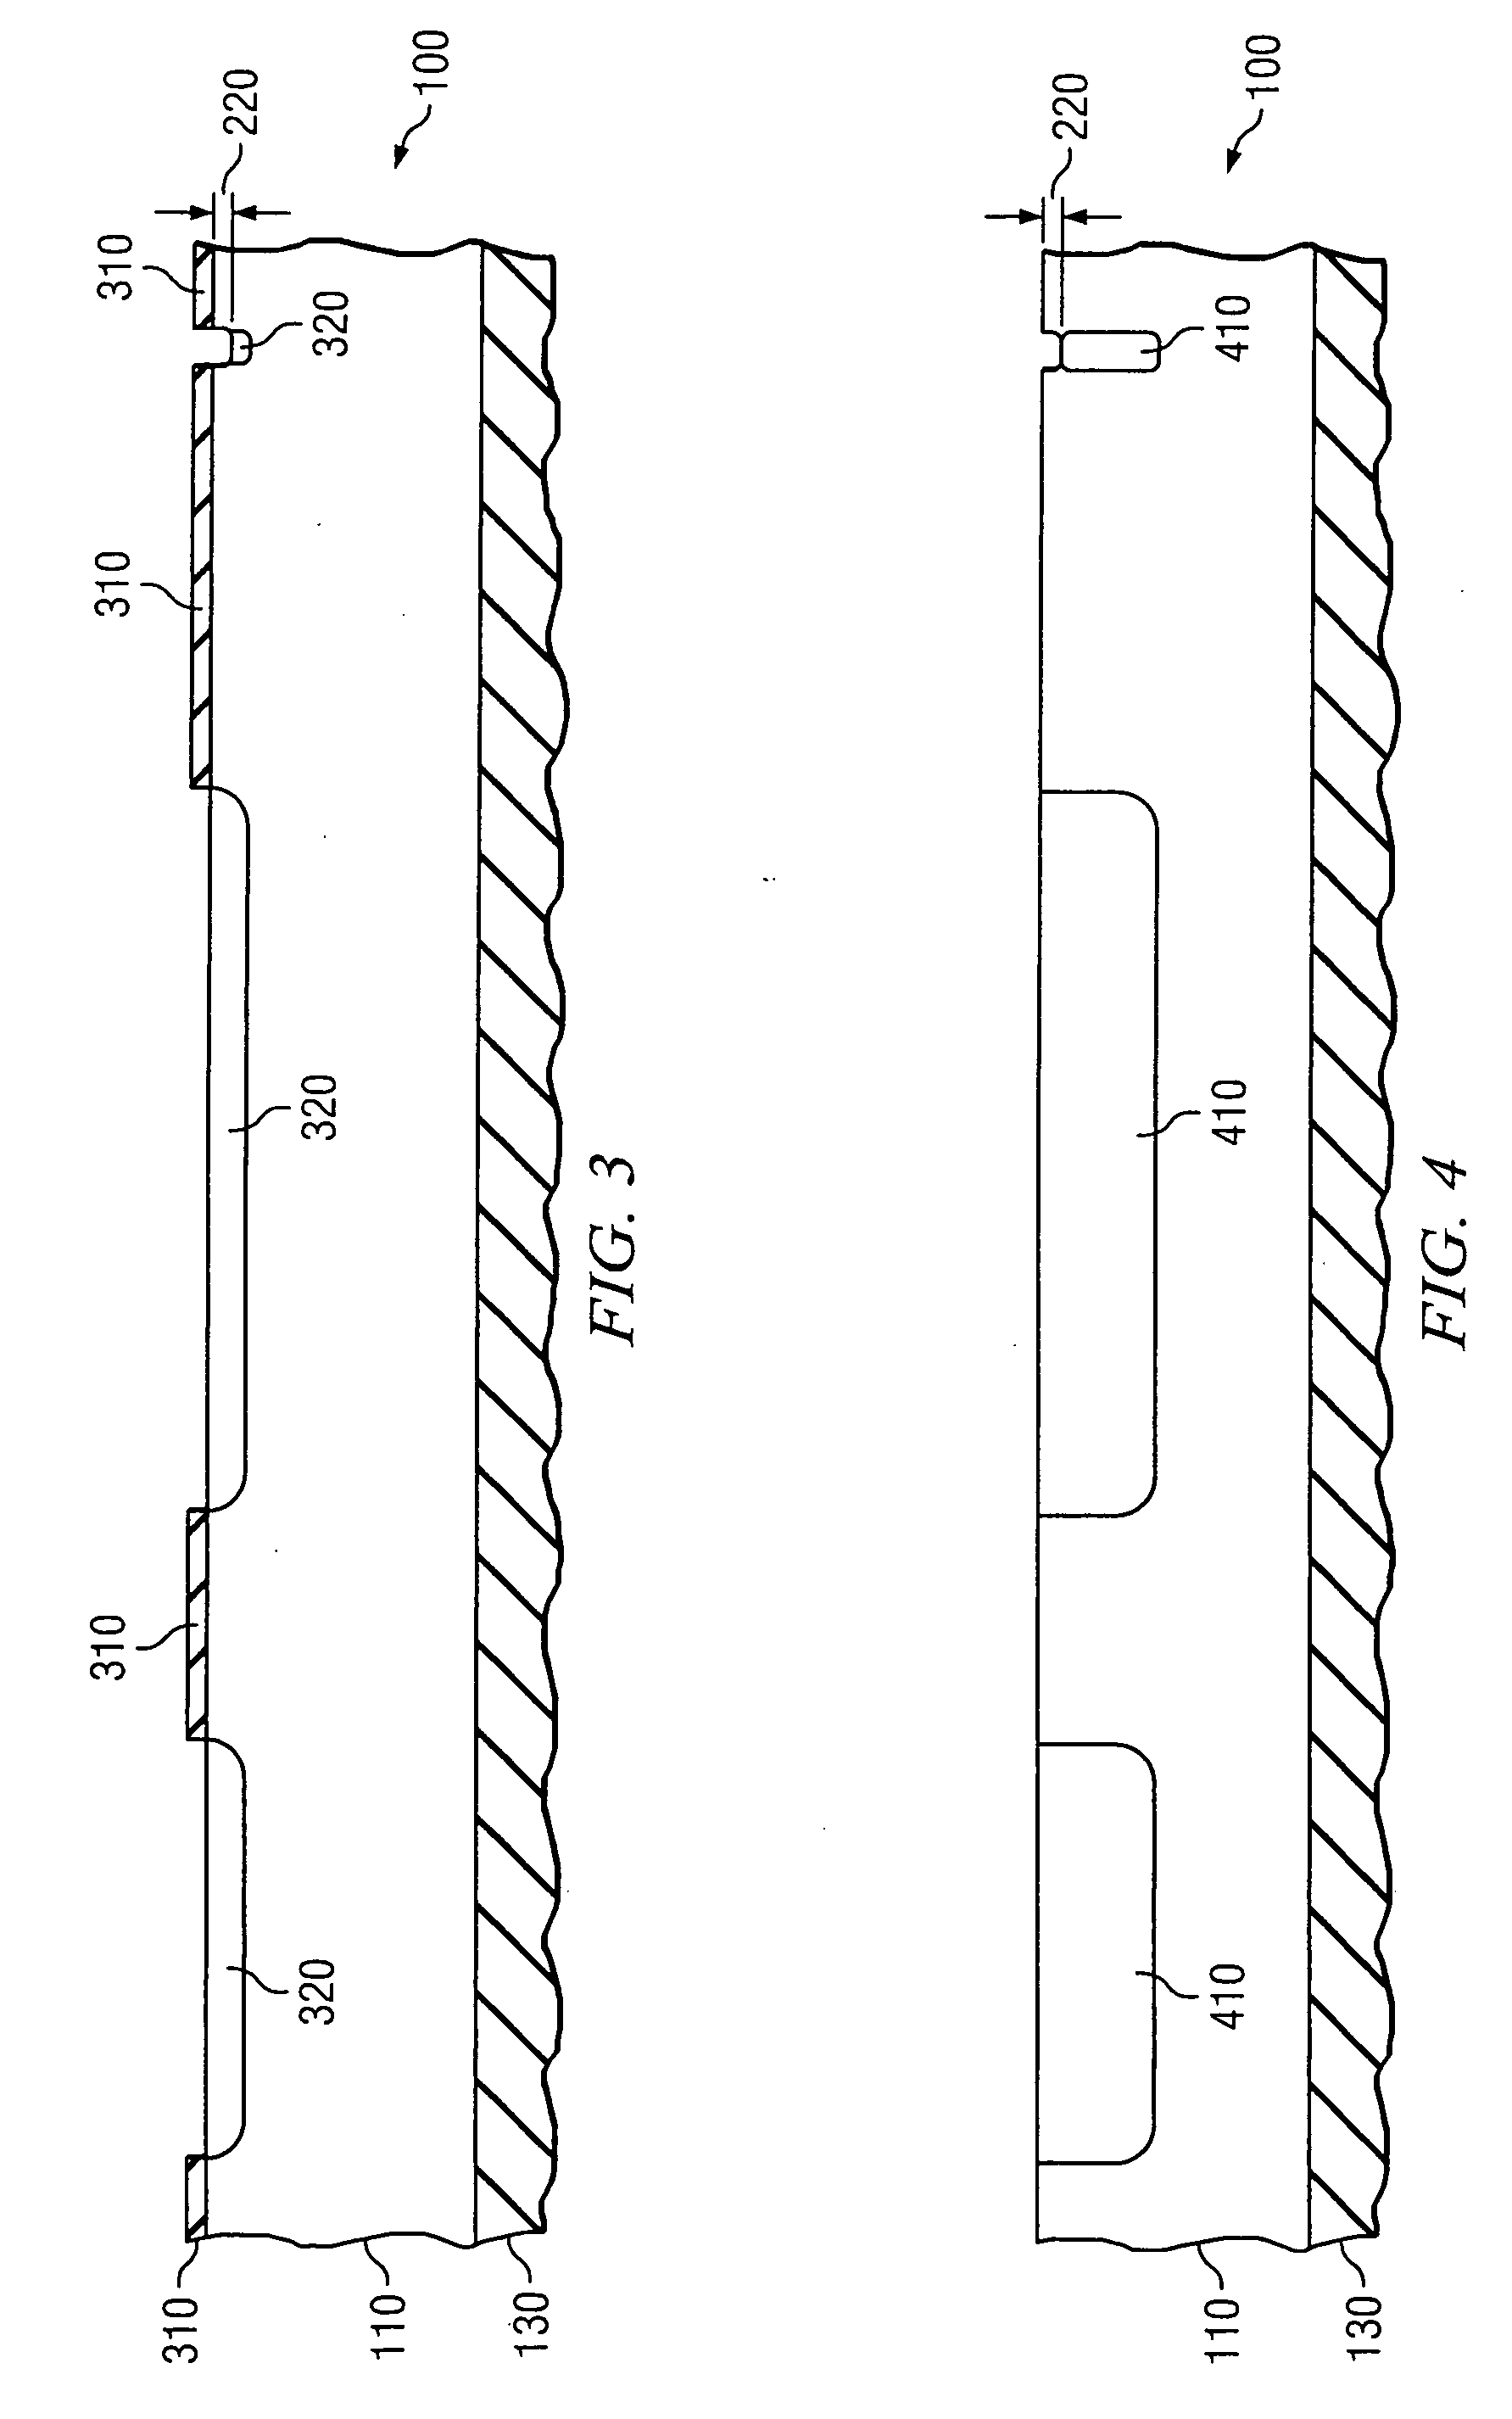 Method for manufacturing a semiconductor device having an alignment feature formed using an N-type dopant and a wet oxidation process